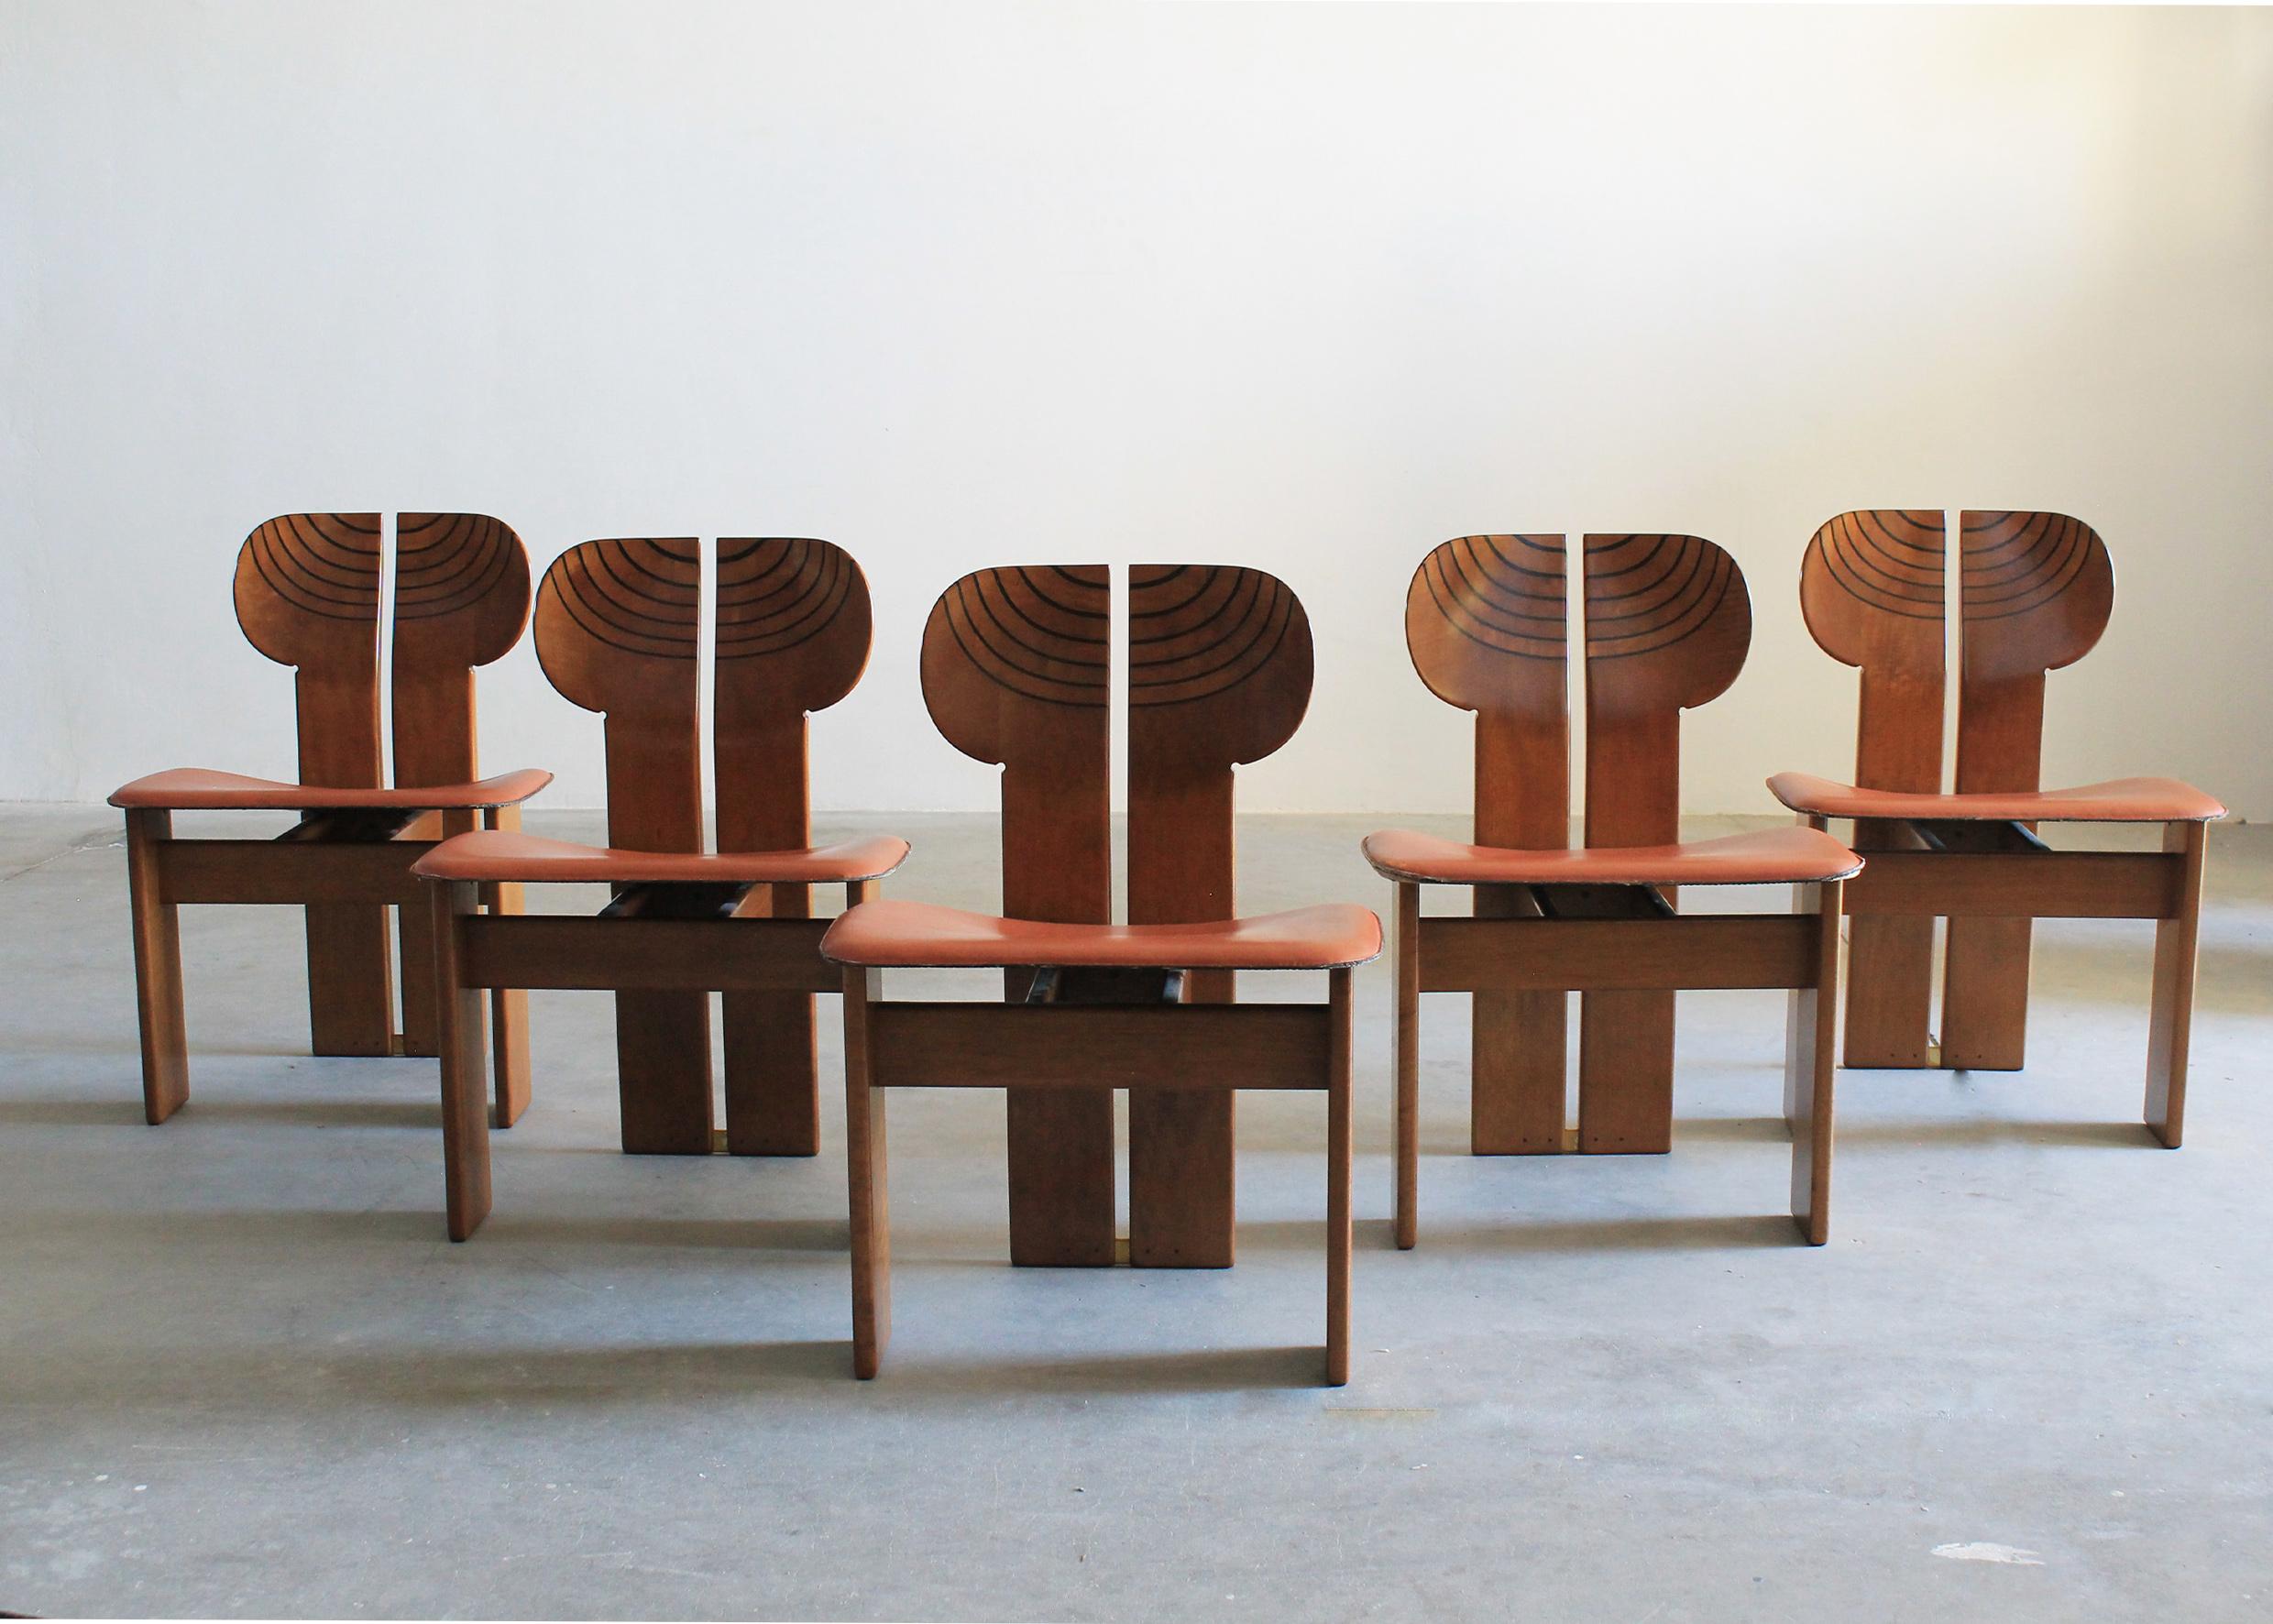 Set of five Africa chairs with a structure in walnut wood and burl, seats upholstered with beautiful high-quality leather and brass details. 

These unique sculptural chairs were designed by Tobia and Afra Scarpa, and they are part of the Artona